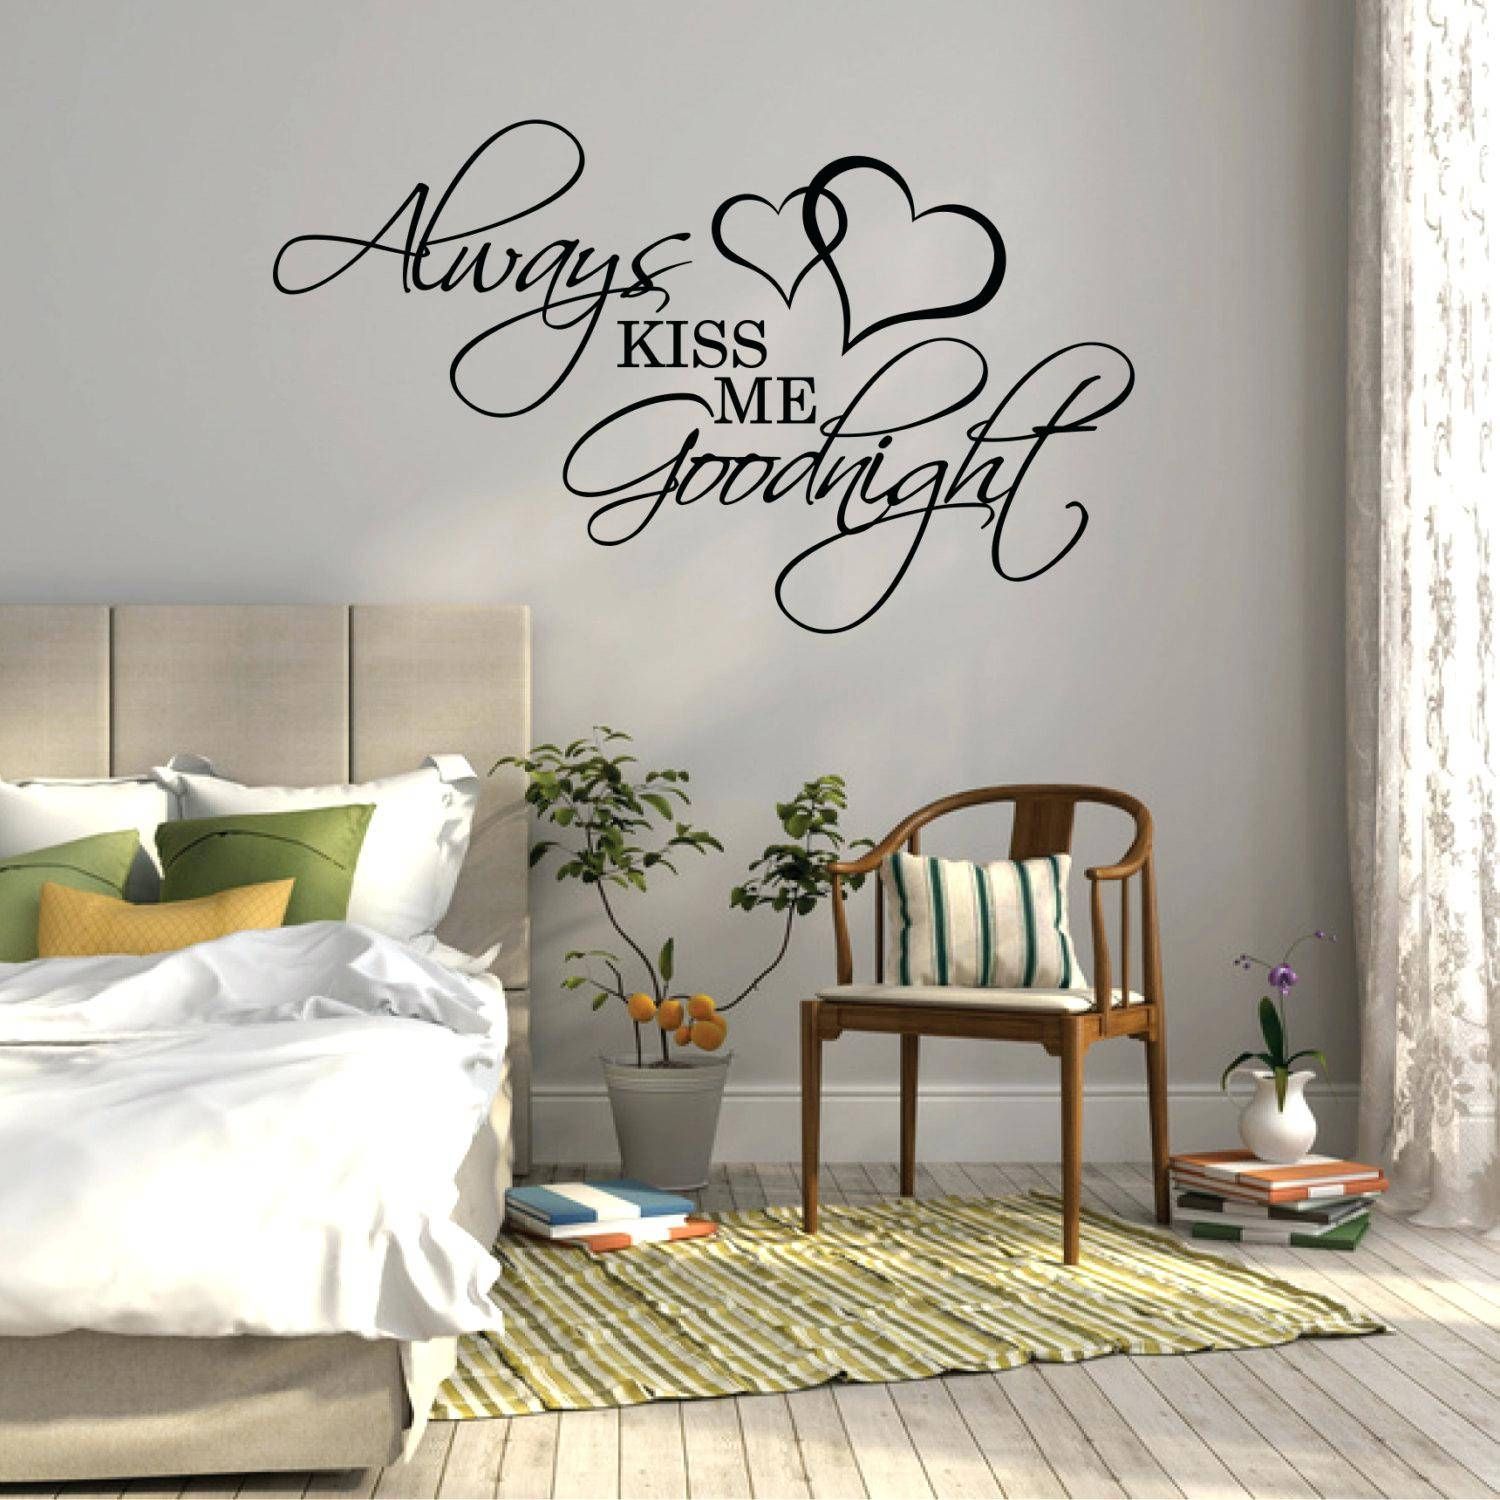 Wall Ideas : Zoom Love Wall Art Decor Love Decors Wall Stickers For Most Up To Date Kohls Wall Decals (View 6 of 25)